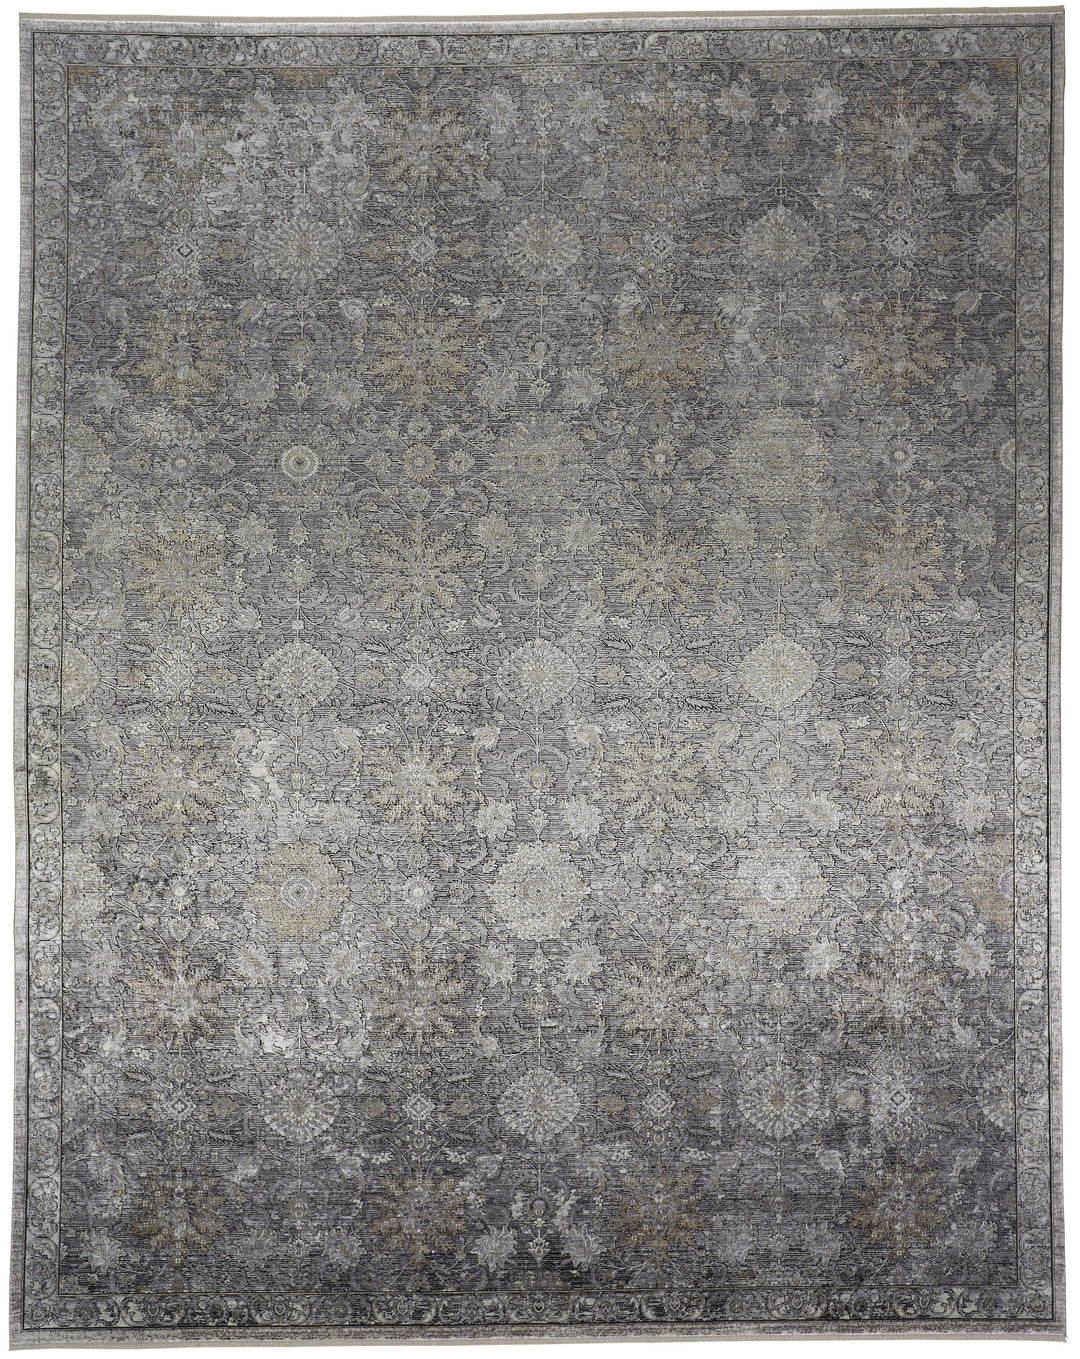 Feizy Feizy Sarrant Vintage Space-Dyed Rug - Pewter & Stone Gray - Available in 10 Sizes 4' x 5'-3" 9193965FSND000C06